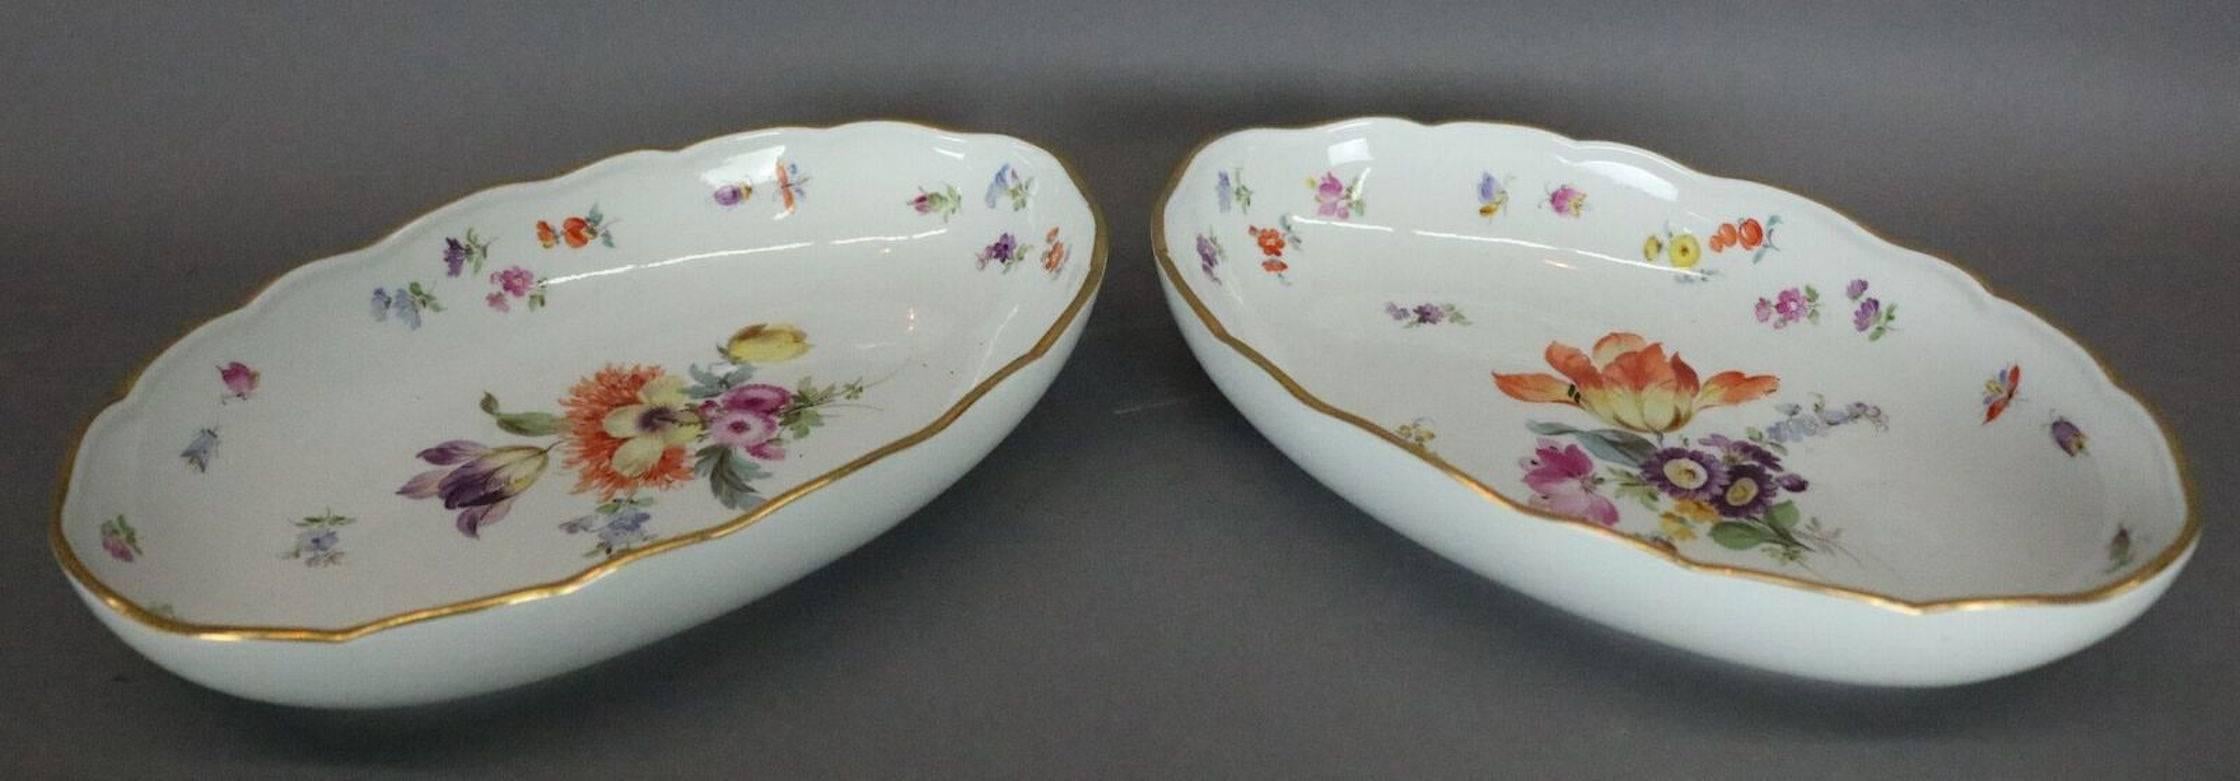 Porcelain 56 Piece Antique Hand-Painted Meissen Dinnerware, Flowers & Insects, circa 1890